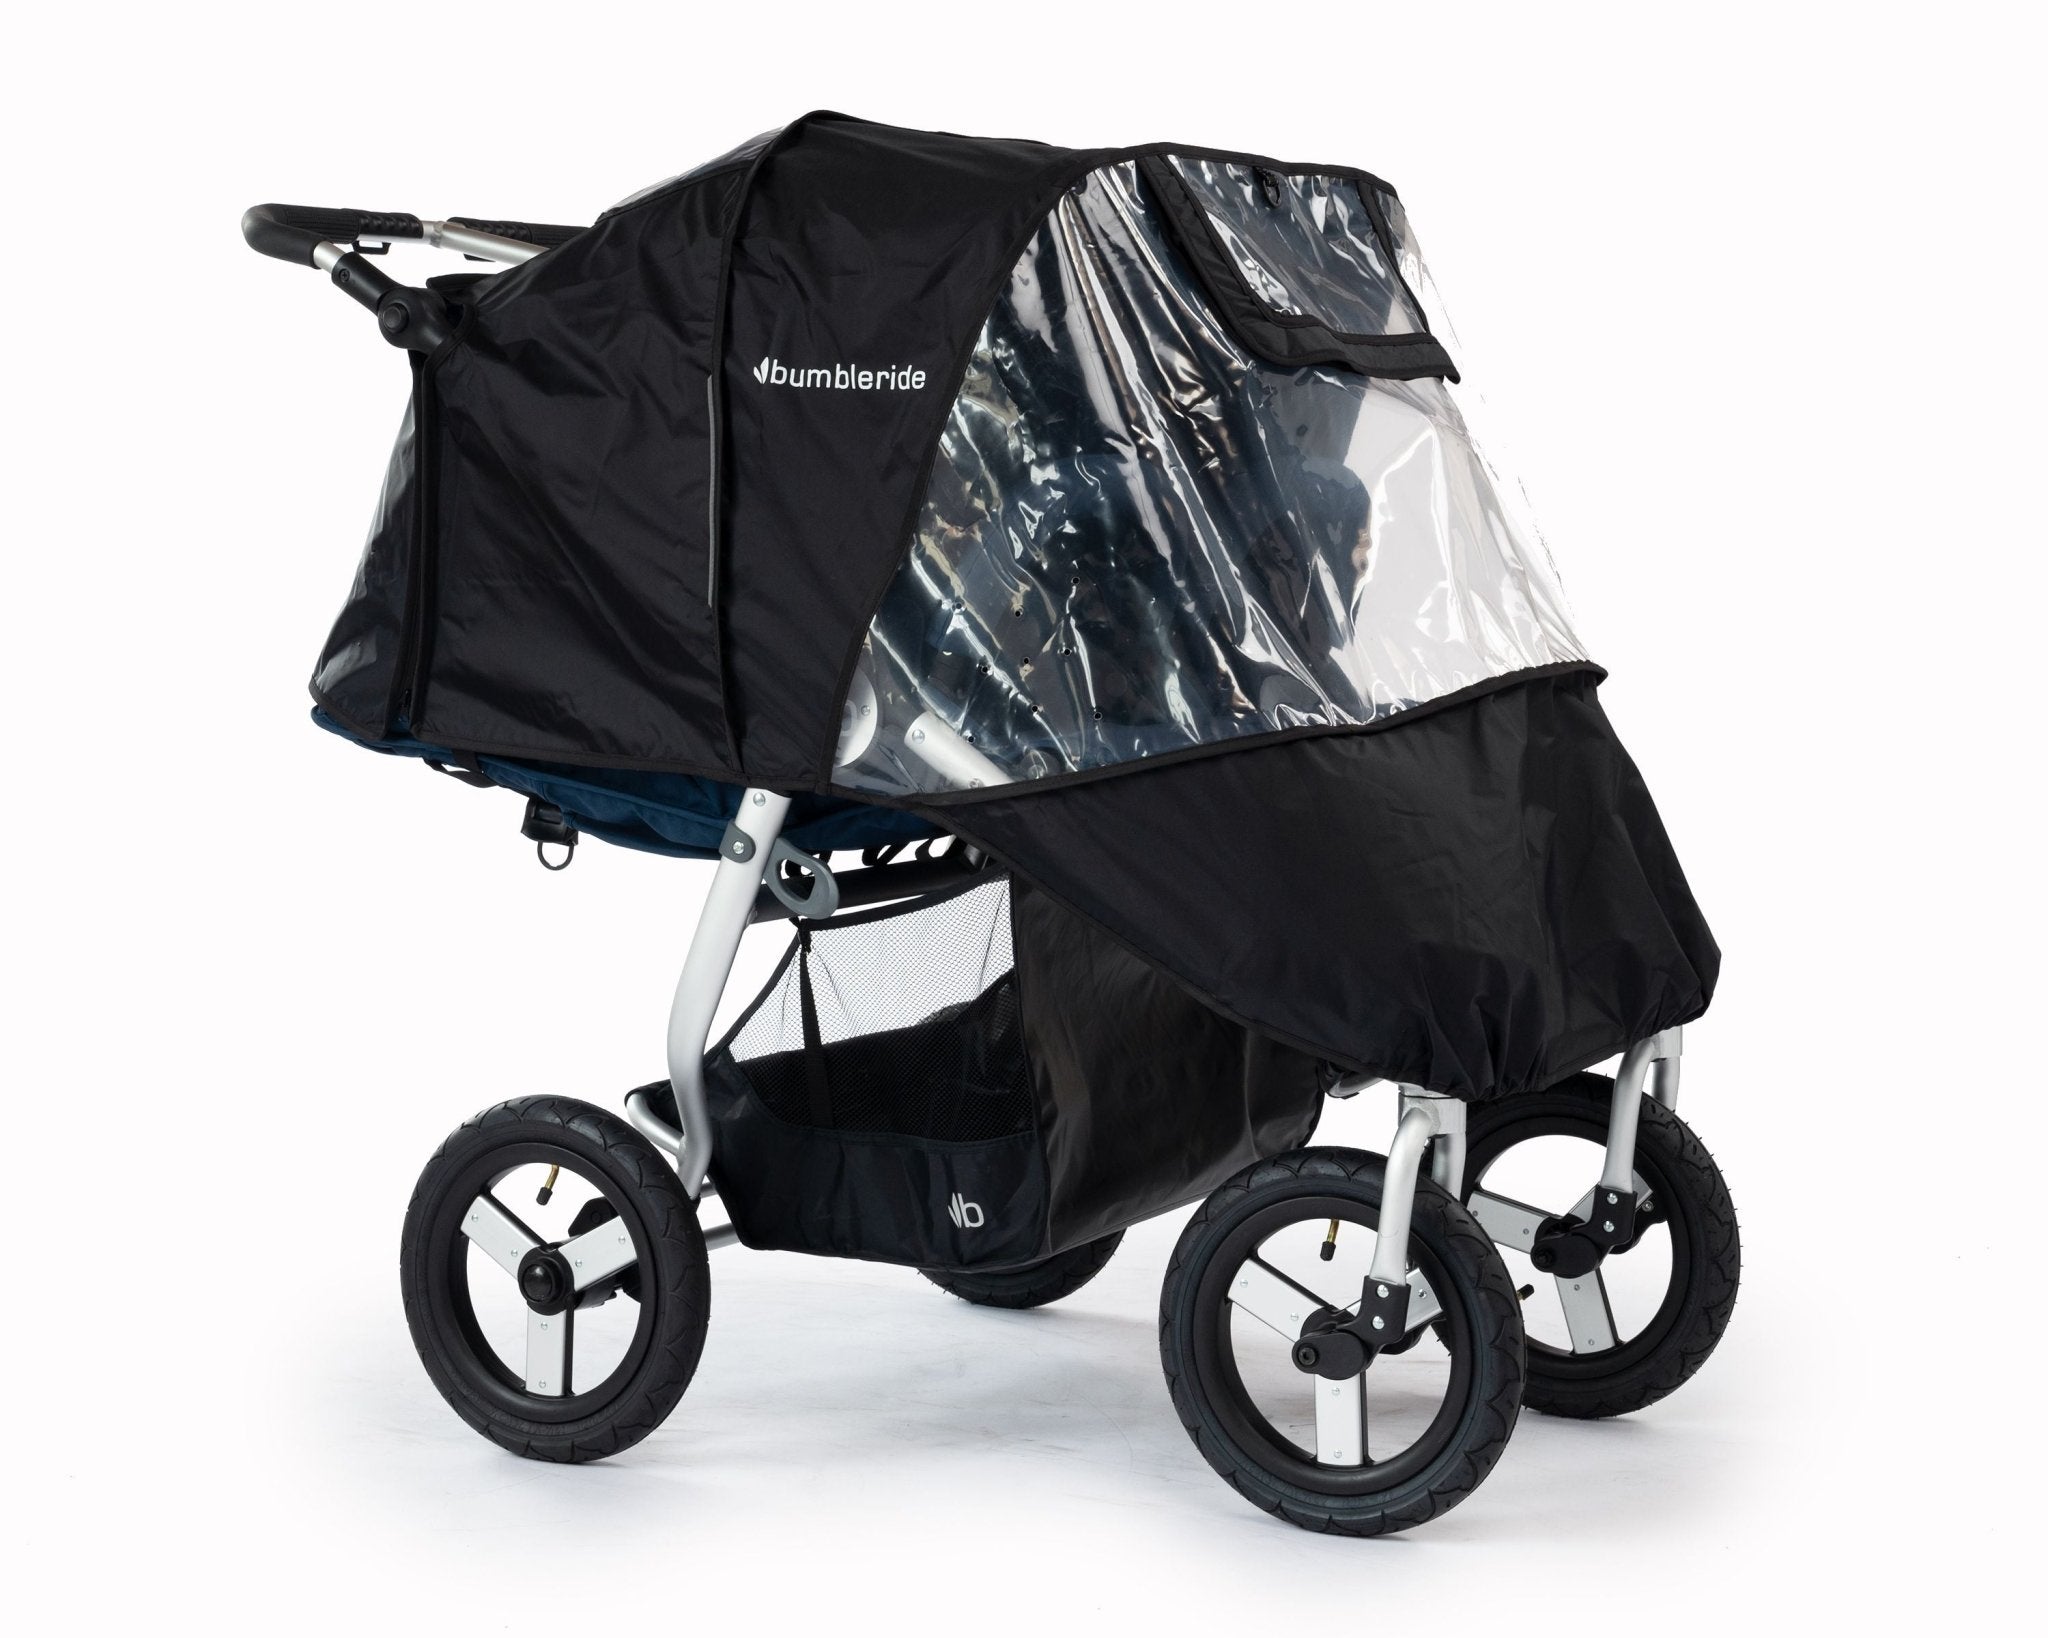 Bumbleride Indie Twin Rain Cover - ANB Baby -$50 - $75